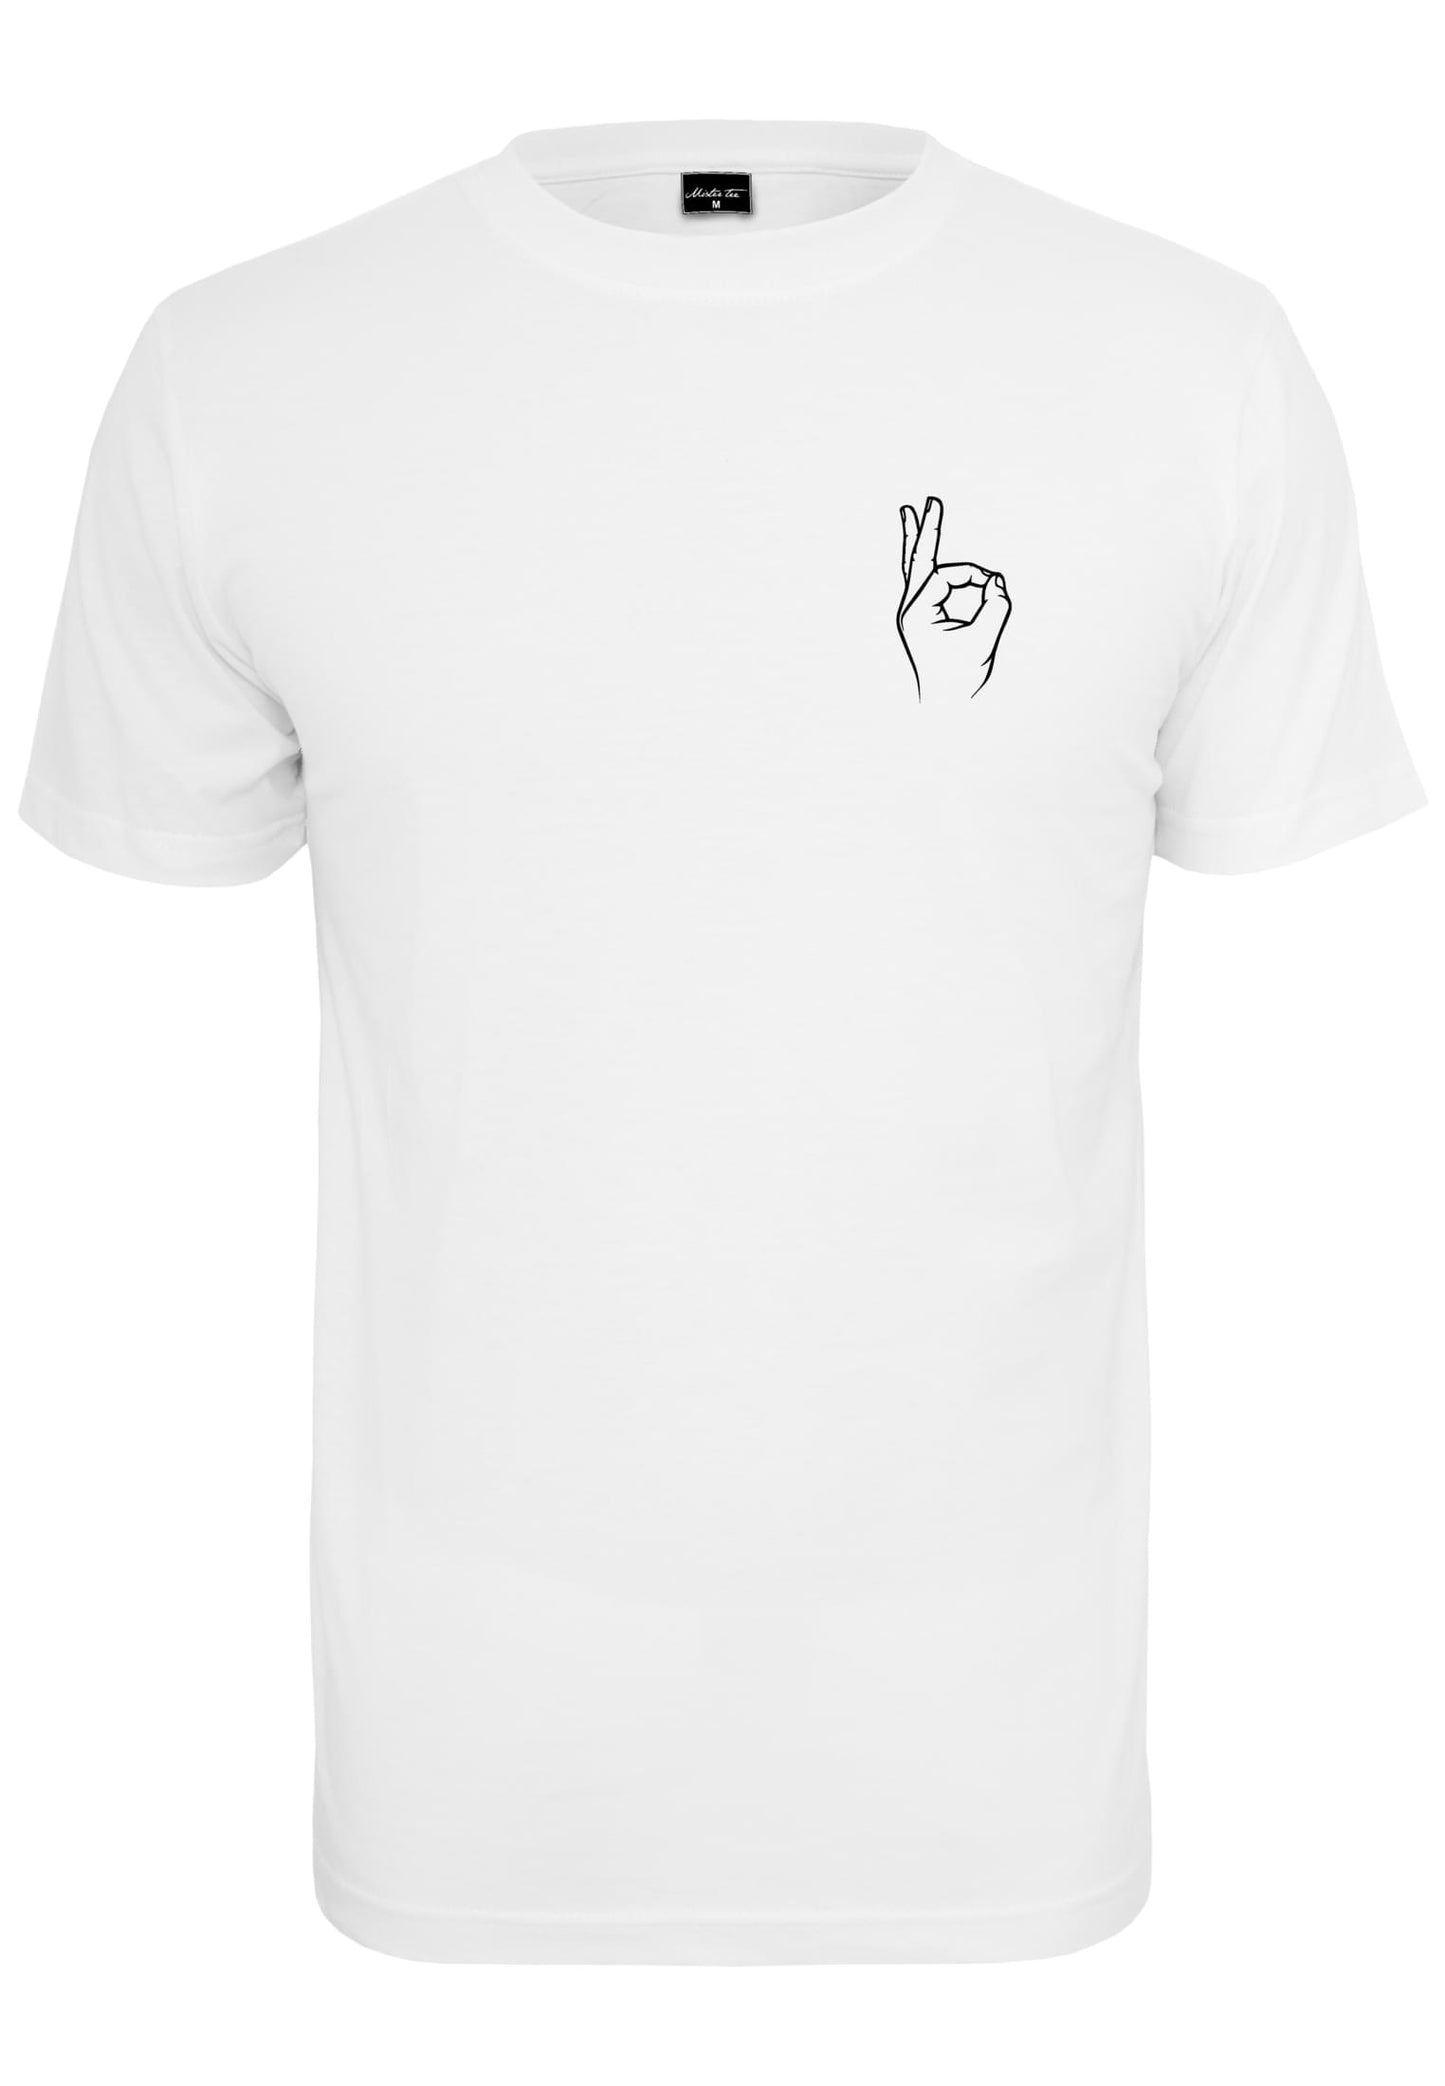 Mister Tee Easy Sign T-Shirt white im BAWRZ® One Stop Hip-Hop Shop